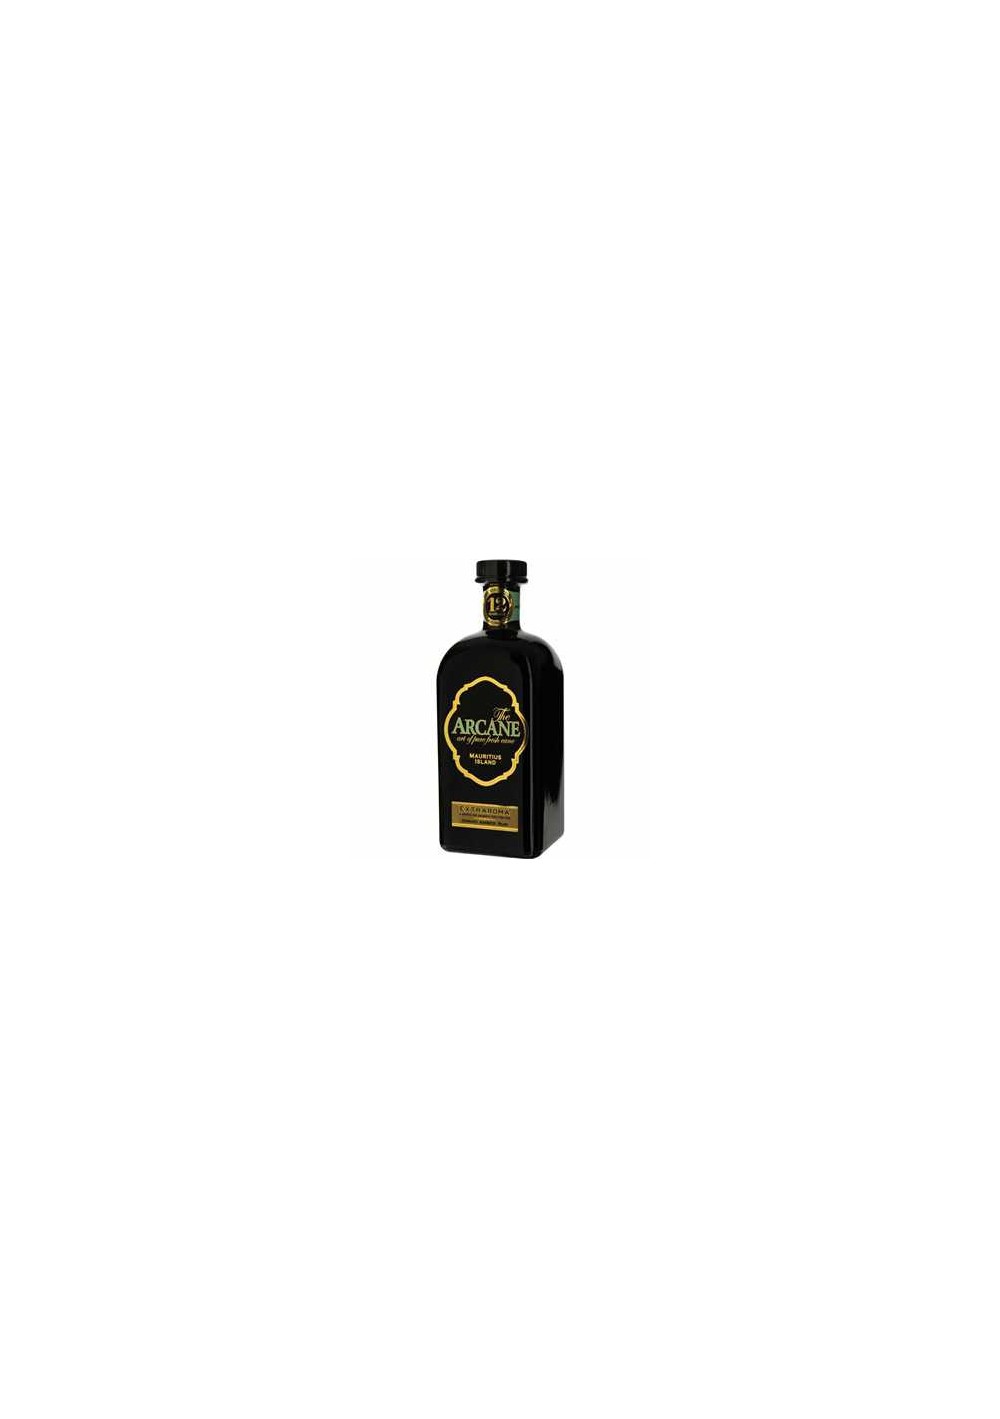 Arcane - Extraroma - 12 years old - Rum - (70cl)